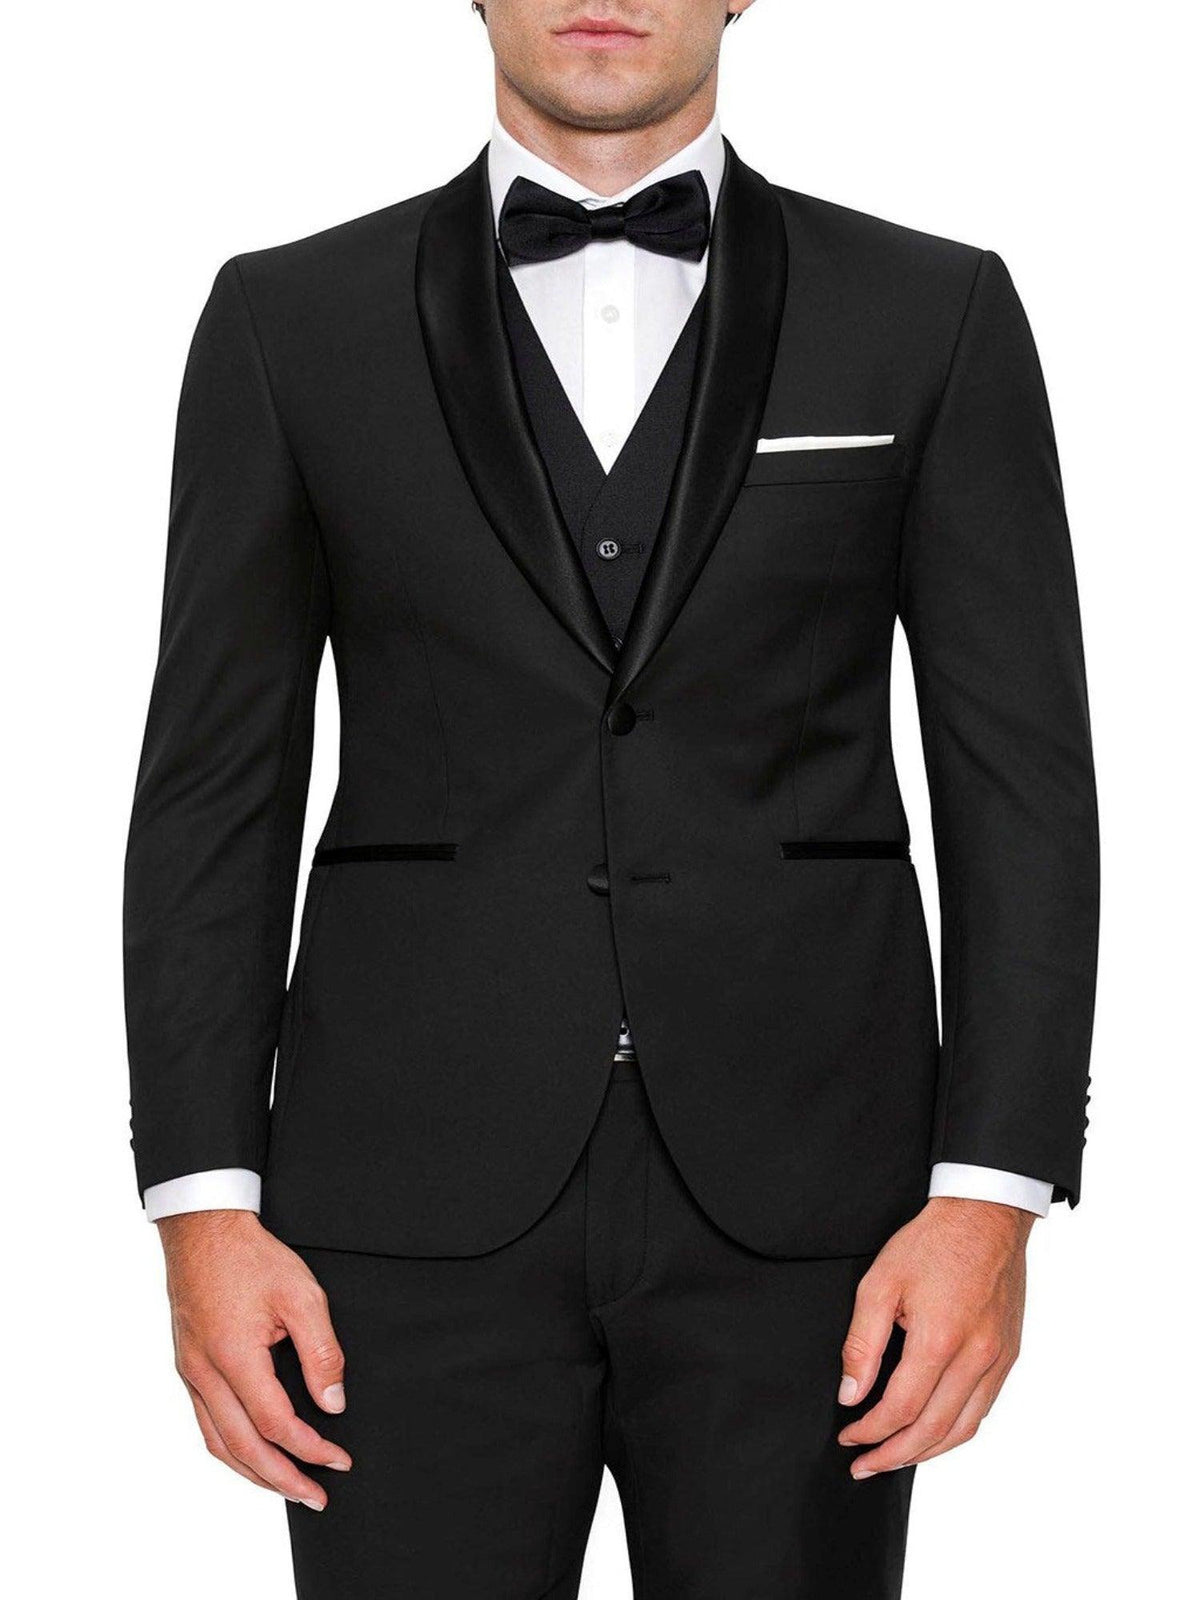 Andes Dinner Jacket Shawl Collar - Harrys for Menswear